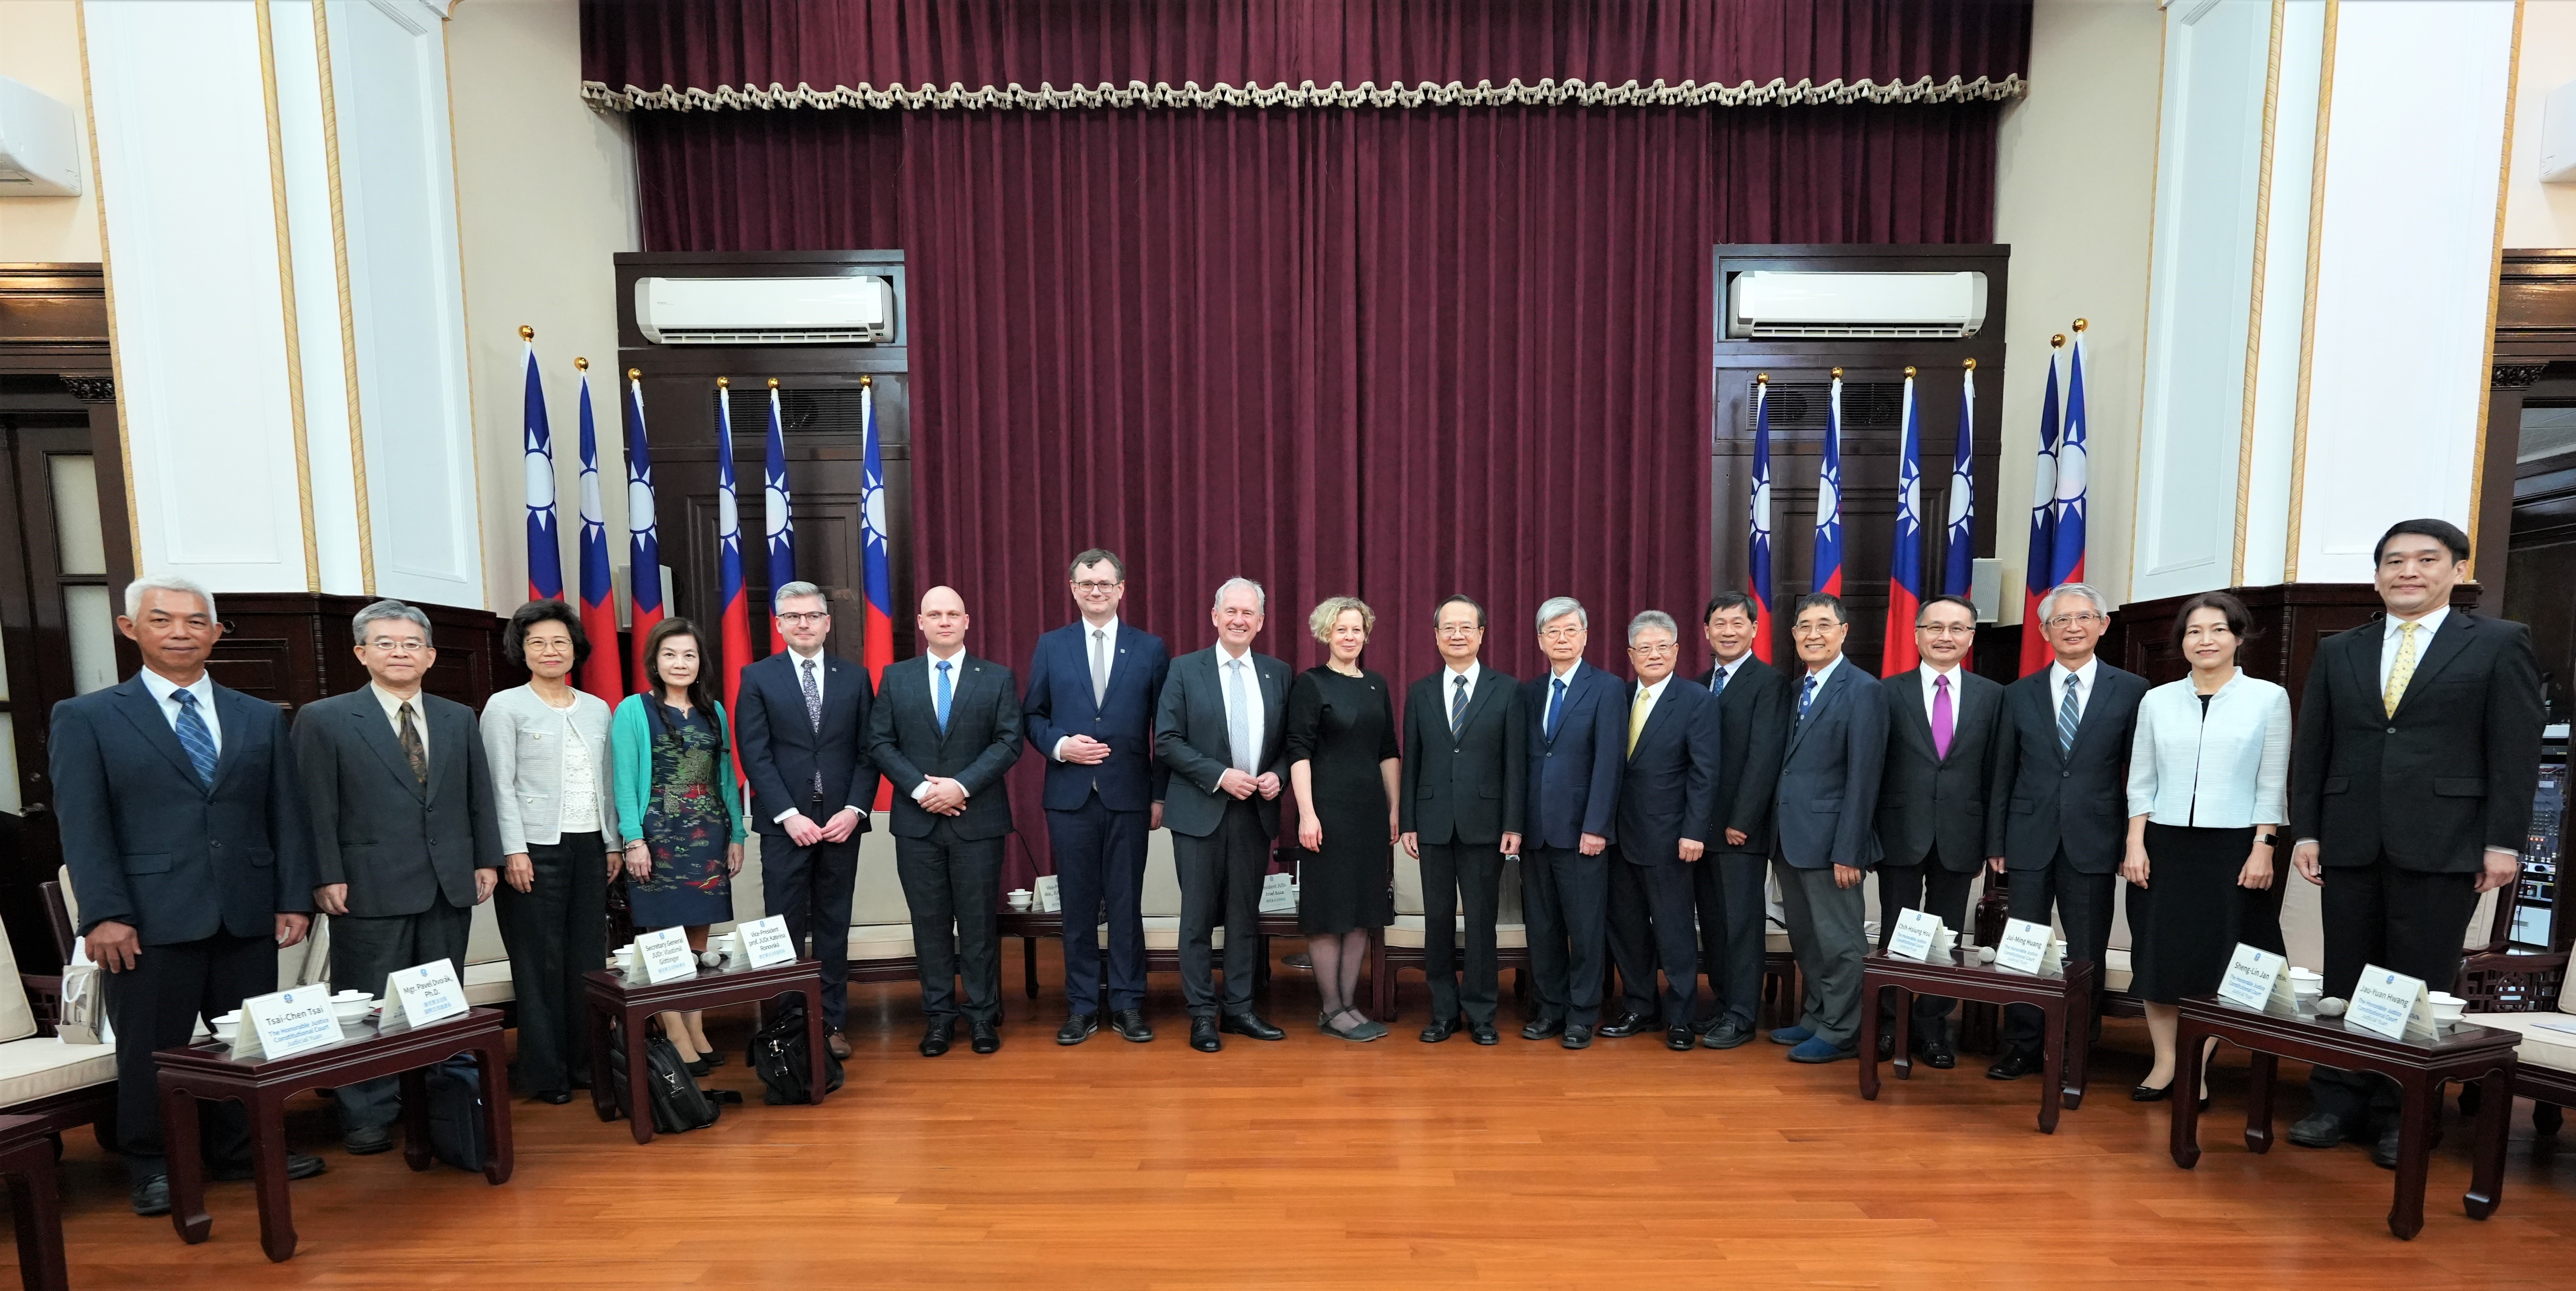 Photo description: The visit of the delegation of the Constitutional Court of the Czech Republic.  From left to right: Justice Po-Hsiang YU, Justice Chung-Wu CHEN, Justice Fu-Meei JU, Justice Tsai-Chen TSAI, Dr. Pavel Dvořák (Head of the External Relations and Protocol Department of the Czech Constitutional Court), Secretary General Vlastimil Göttinger (Czech Constitutional Court), Vice-President Vojtěch Šimíček (Czech Constitutional Court), President Josef Baxa (Czech Constitutional Court), Vice-President Kateřina Ronovská (Czech Constitutional Court), President and Chief Justice Tzong-Li HSU, Vice President Justice Jeong-Duen TSAI, Justice Chih-Hsiung HSU, Justice Jui-Ming HUANG, Justice Sheng-Lin JAN, Justice Jau-Yuan HWANG, Justice Ming-Yan SHIEH, Justice Tzung-Jen TSAI, and Assoc. Prof. Chi CHUNG (Translator of this event, National Chengchi University).